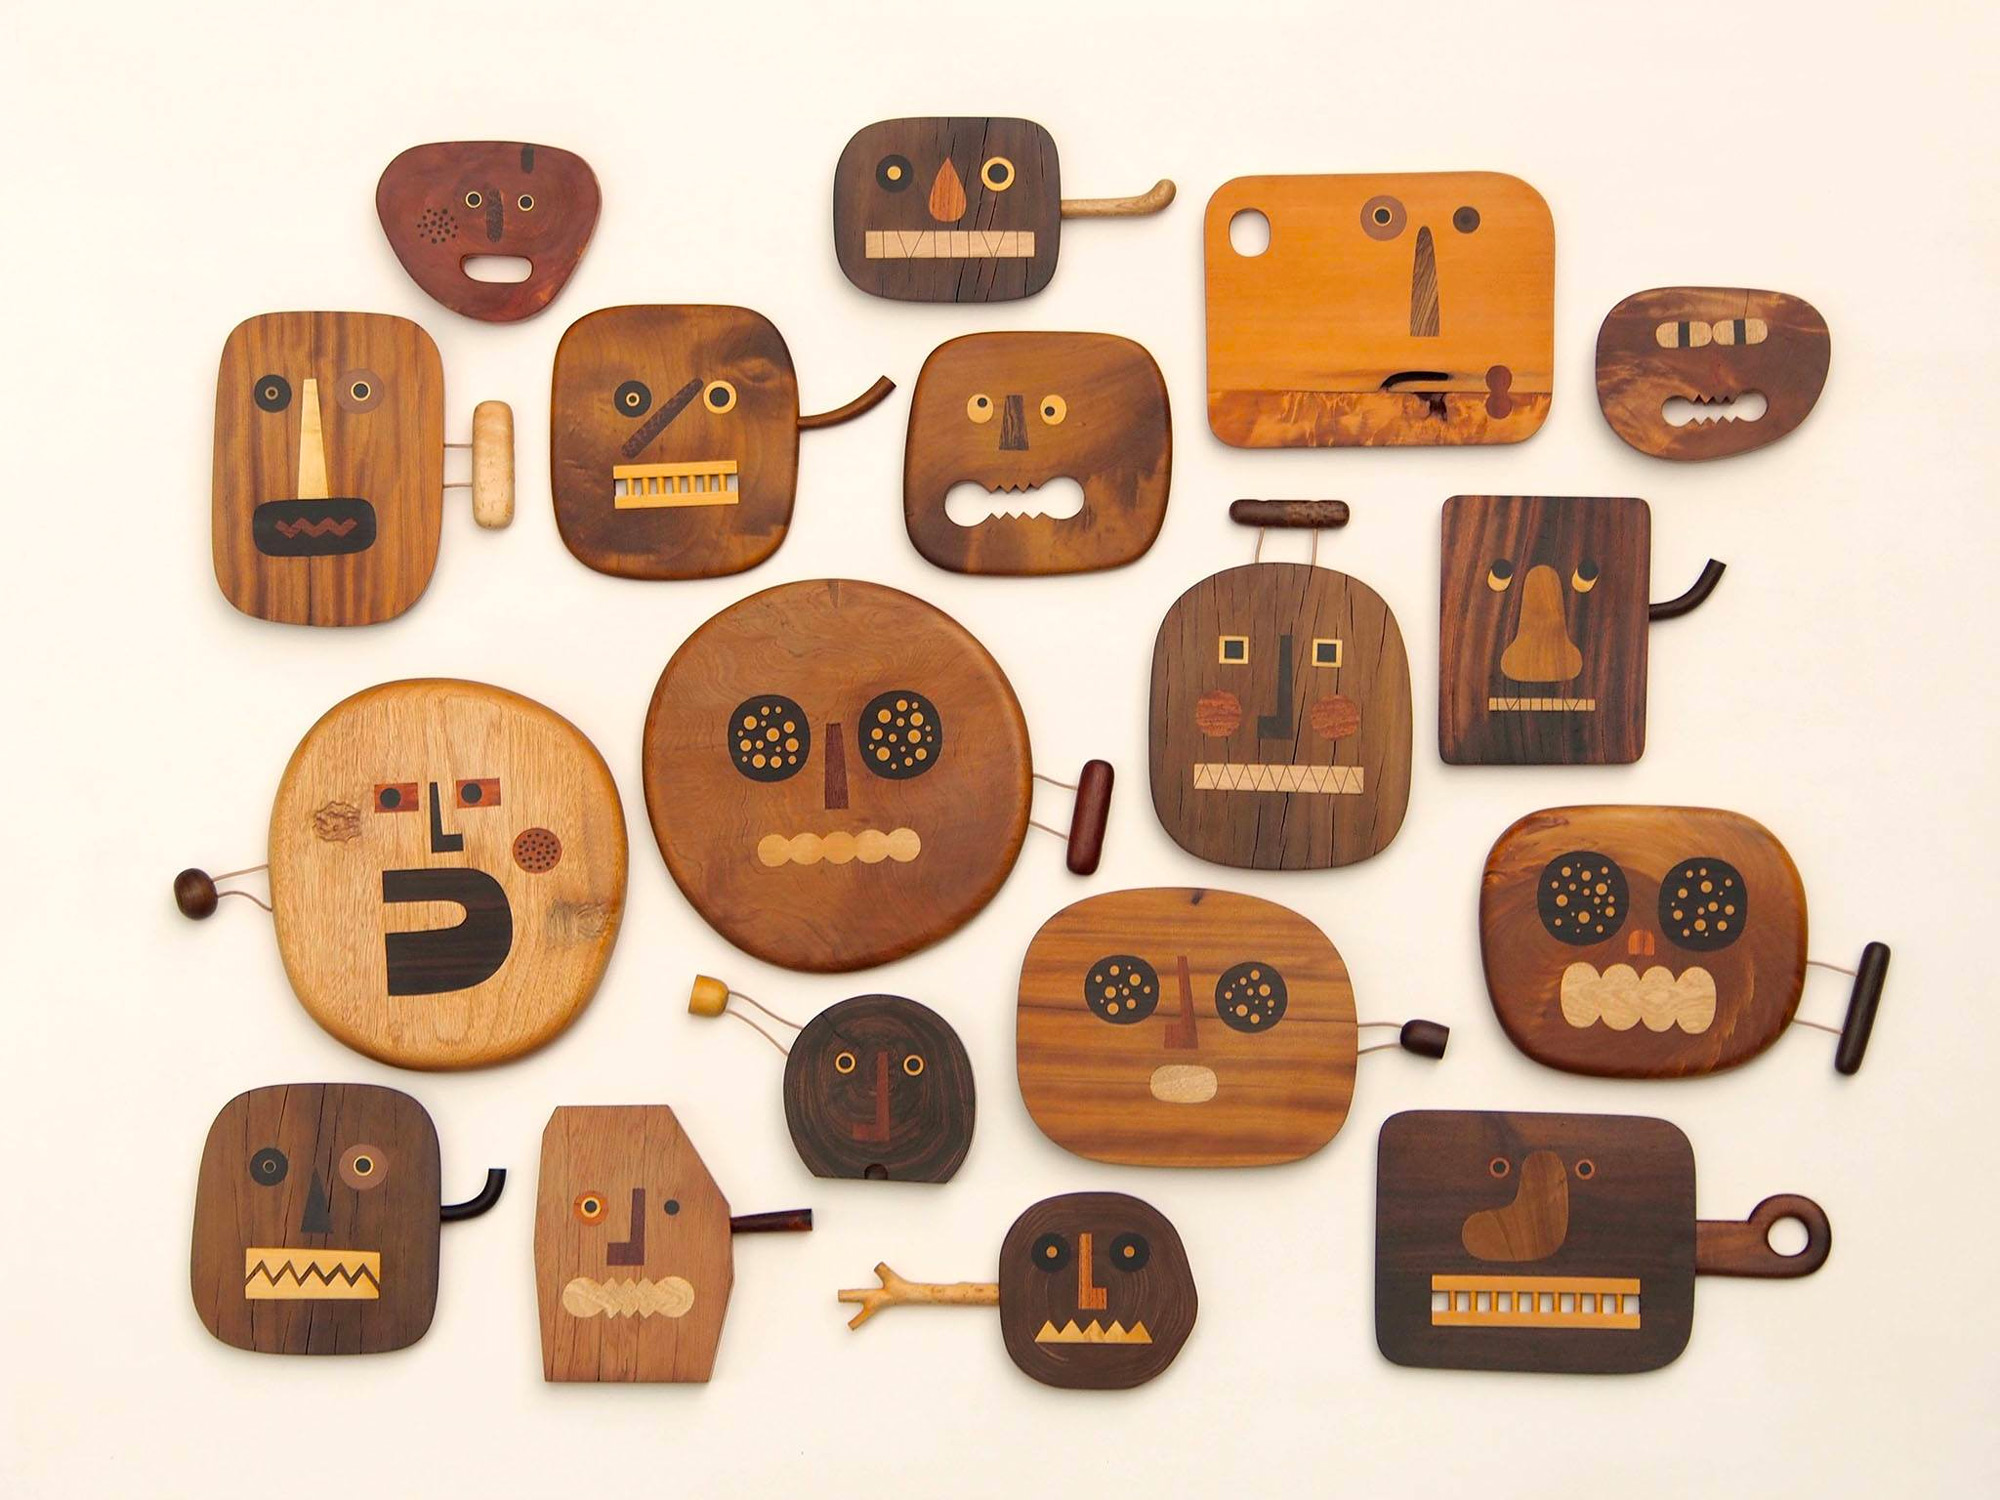 Hand-Carved Wood Sculptures by Jui-Lin Yen Capture Cartoonish Facial Expressions